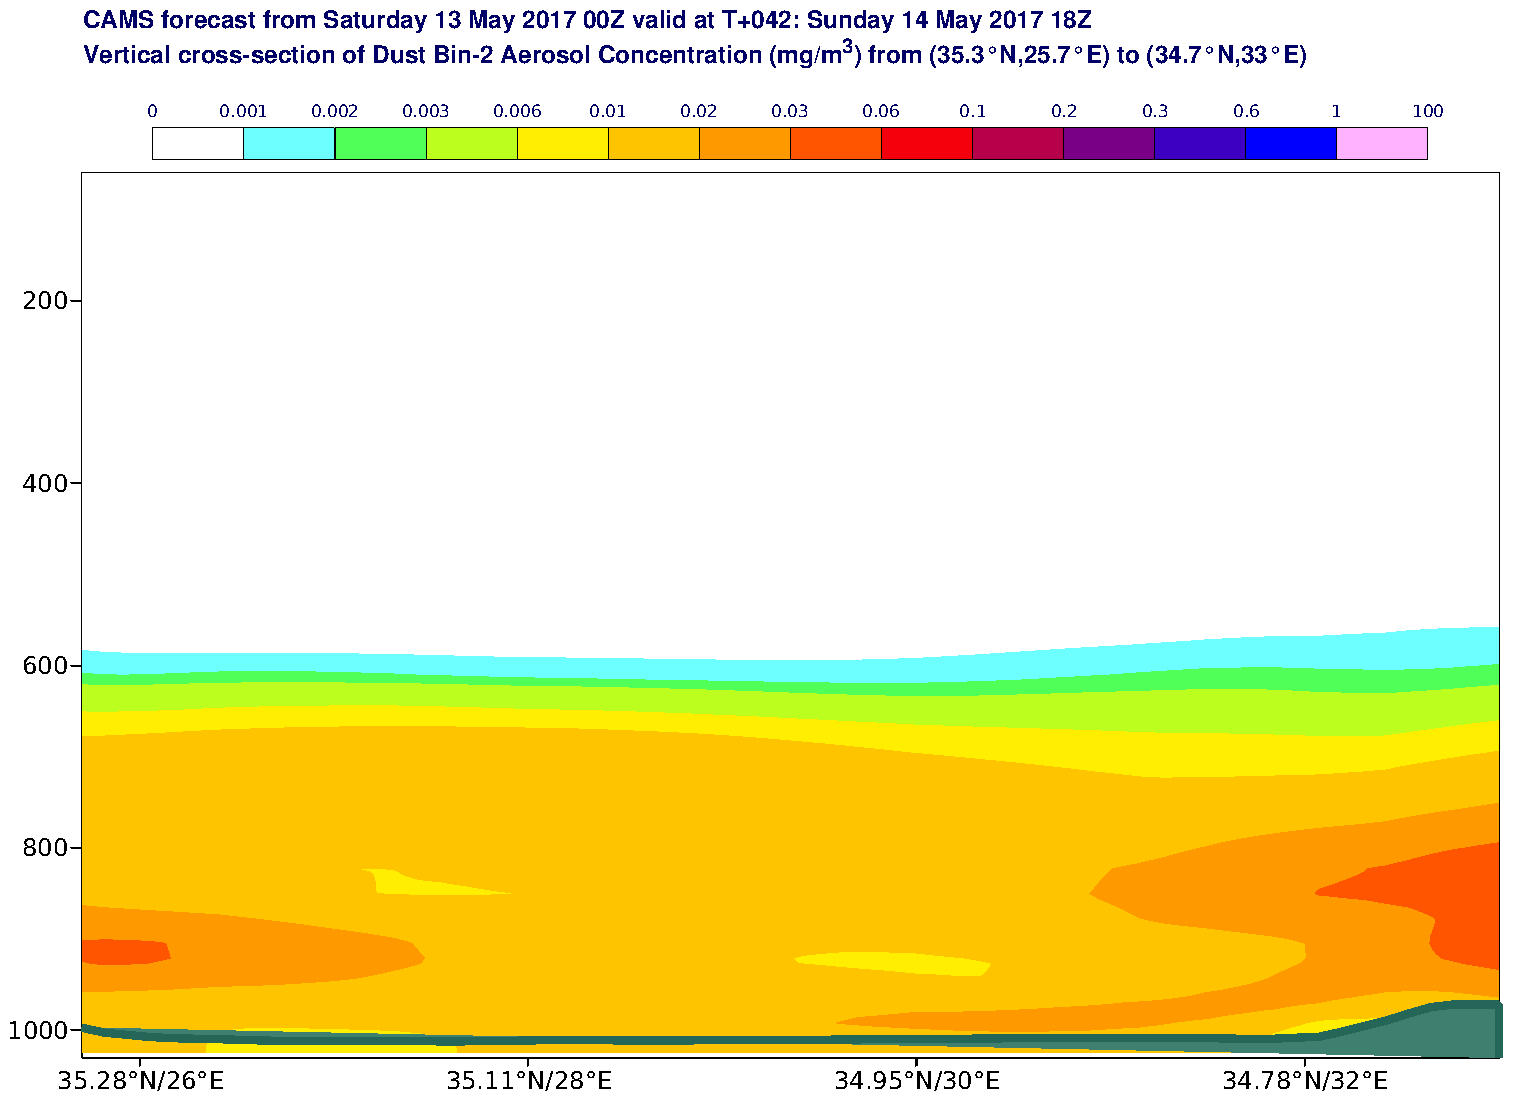 Vertical cross-section of Dust Bin-2 Aerosol Concentration (mg/m3) valid at T42 - 2017-05-14 18:00